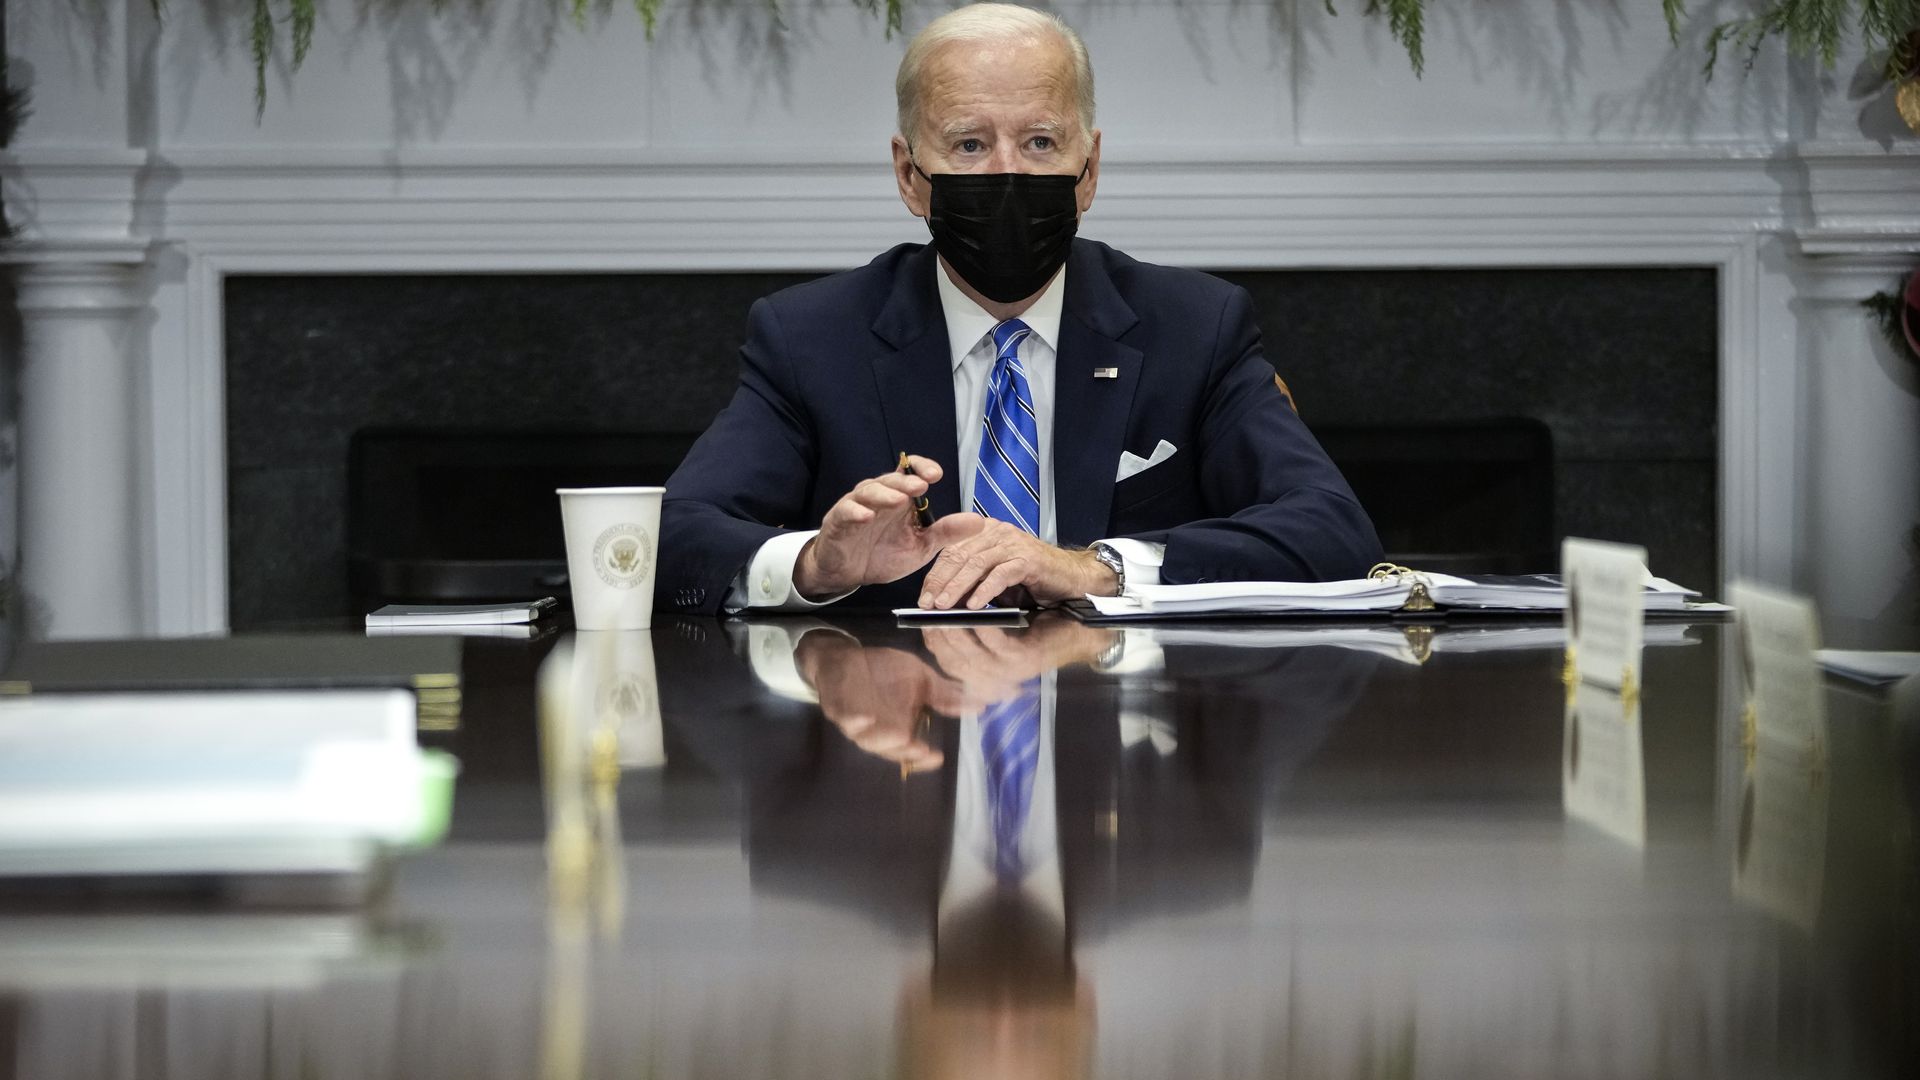 oe Biden speaks during a meeting with the White House COVID-19 Response Team in the Roosevelt Room of the White House December 16, 2021 in Washington, DC. 